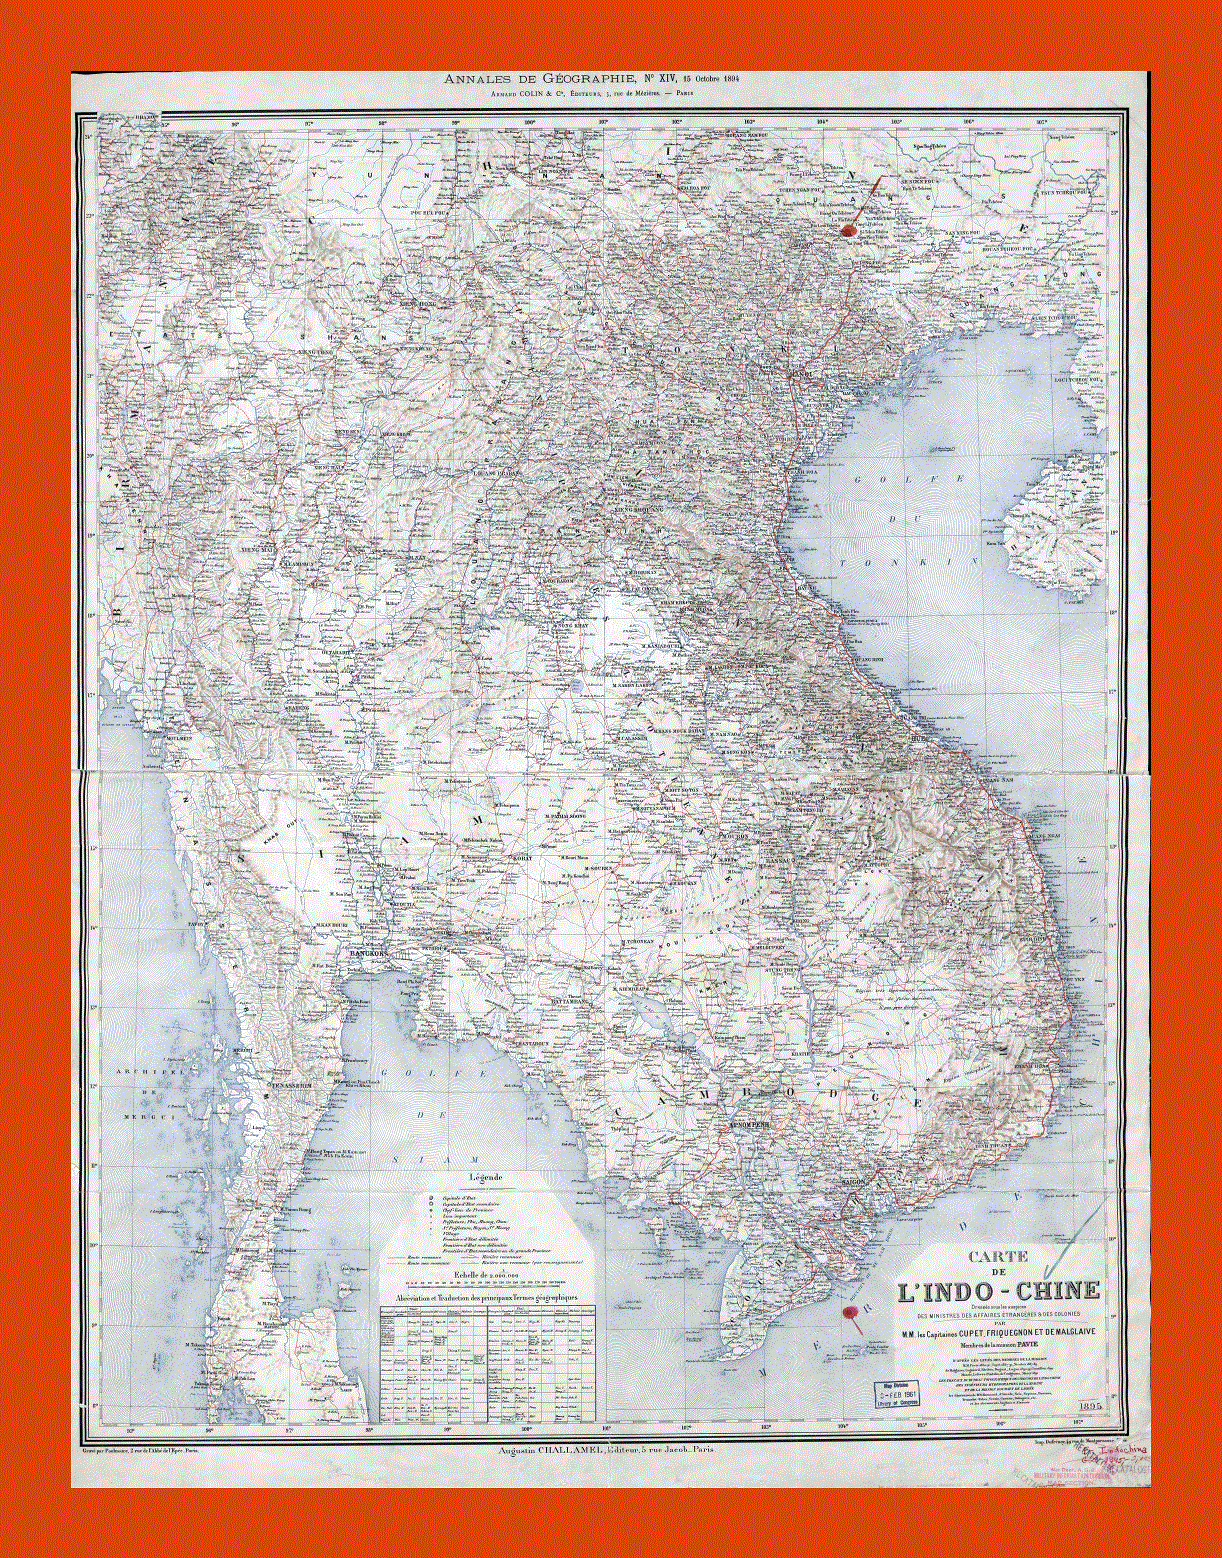 Old map of Indochina - 1895